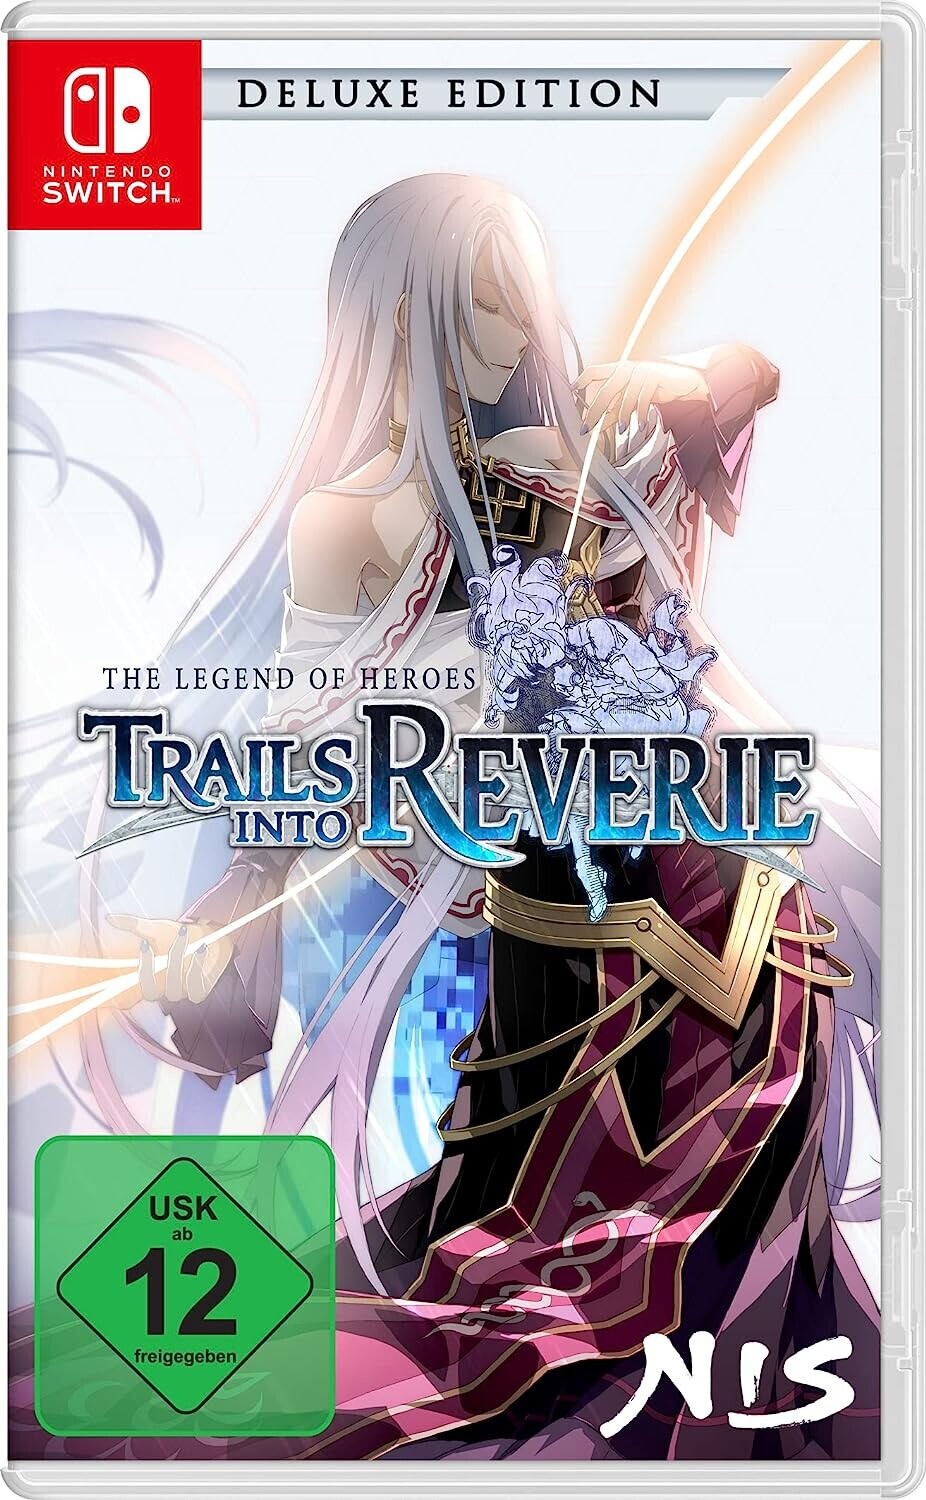 The Legend of Heroes: Trails into Reverie free instals